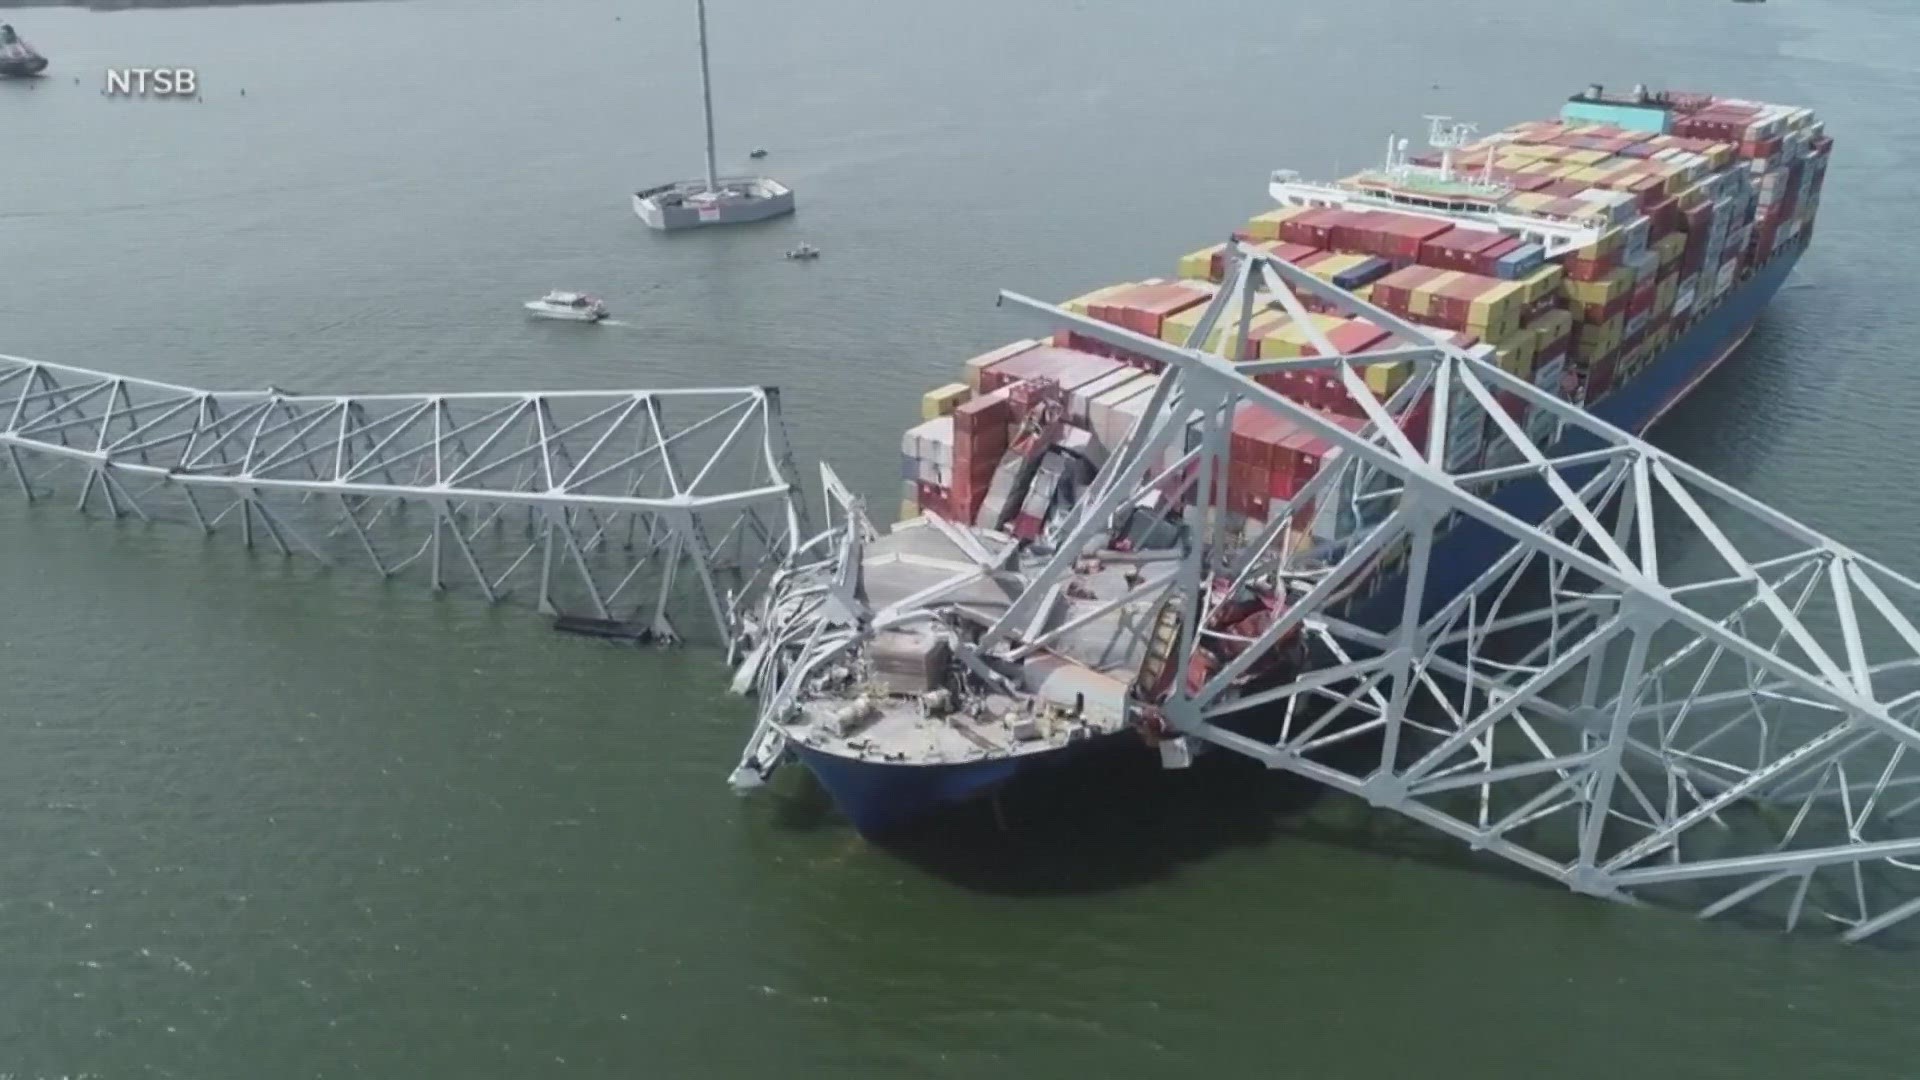 Thursday, the National Transportation Safety Board will interview the two pilots of the cargo ship that crashed into the Francis Scott Key Bridge.